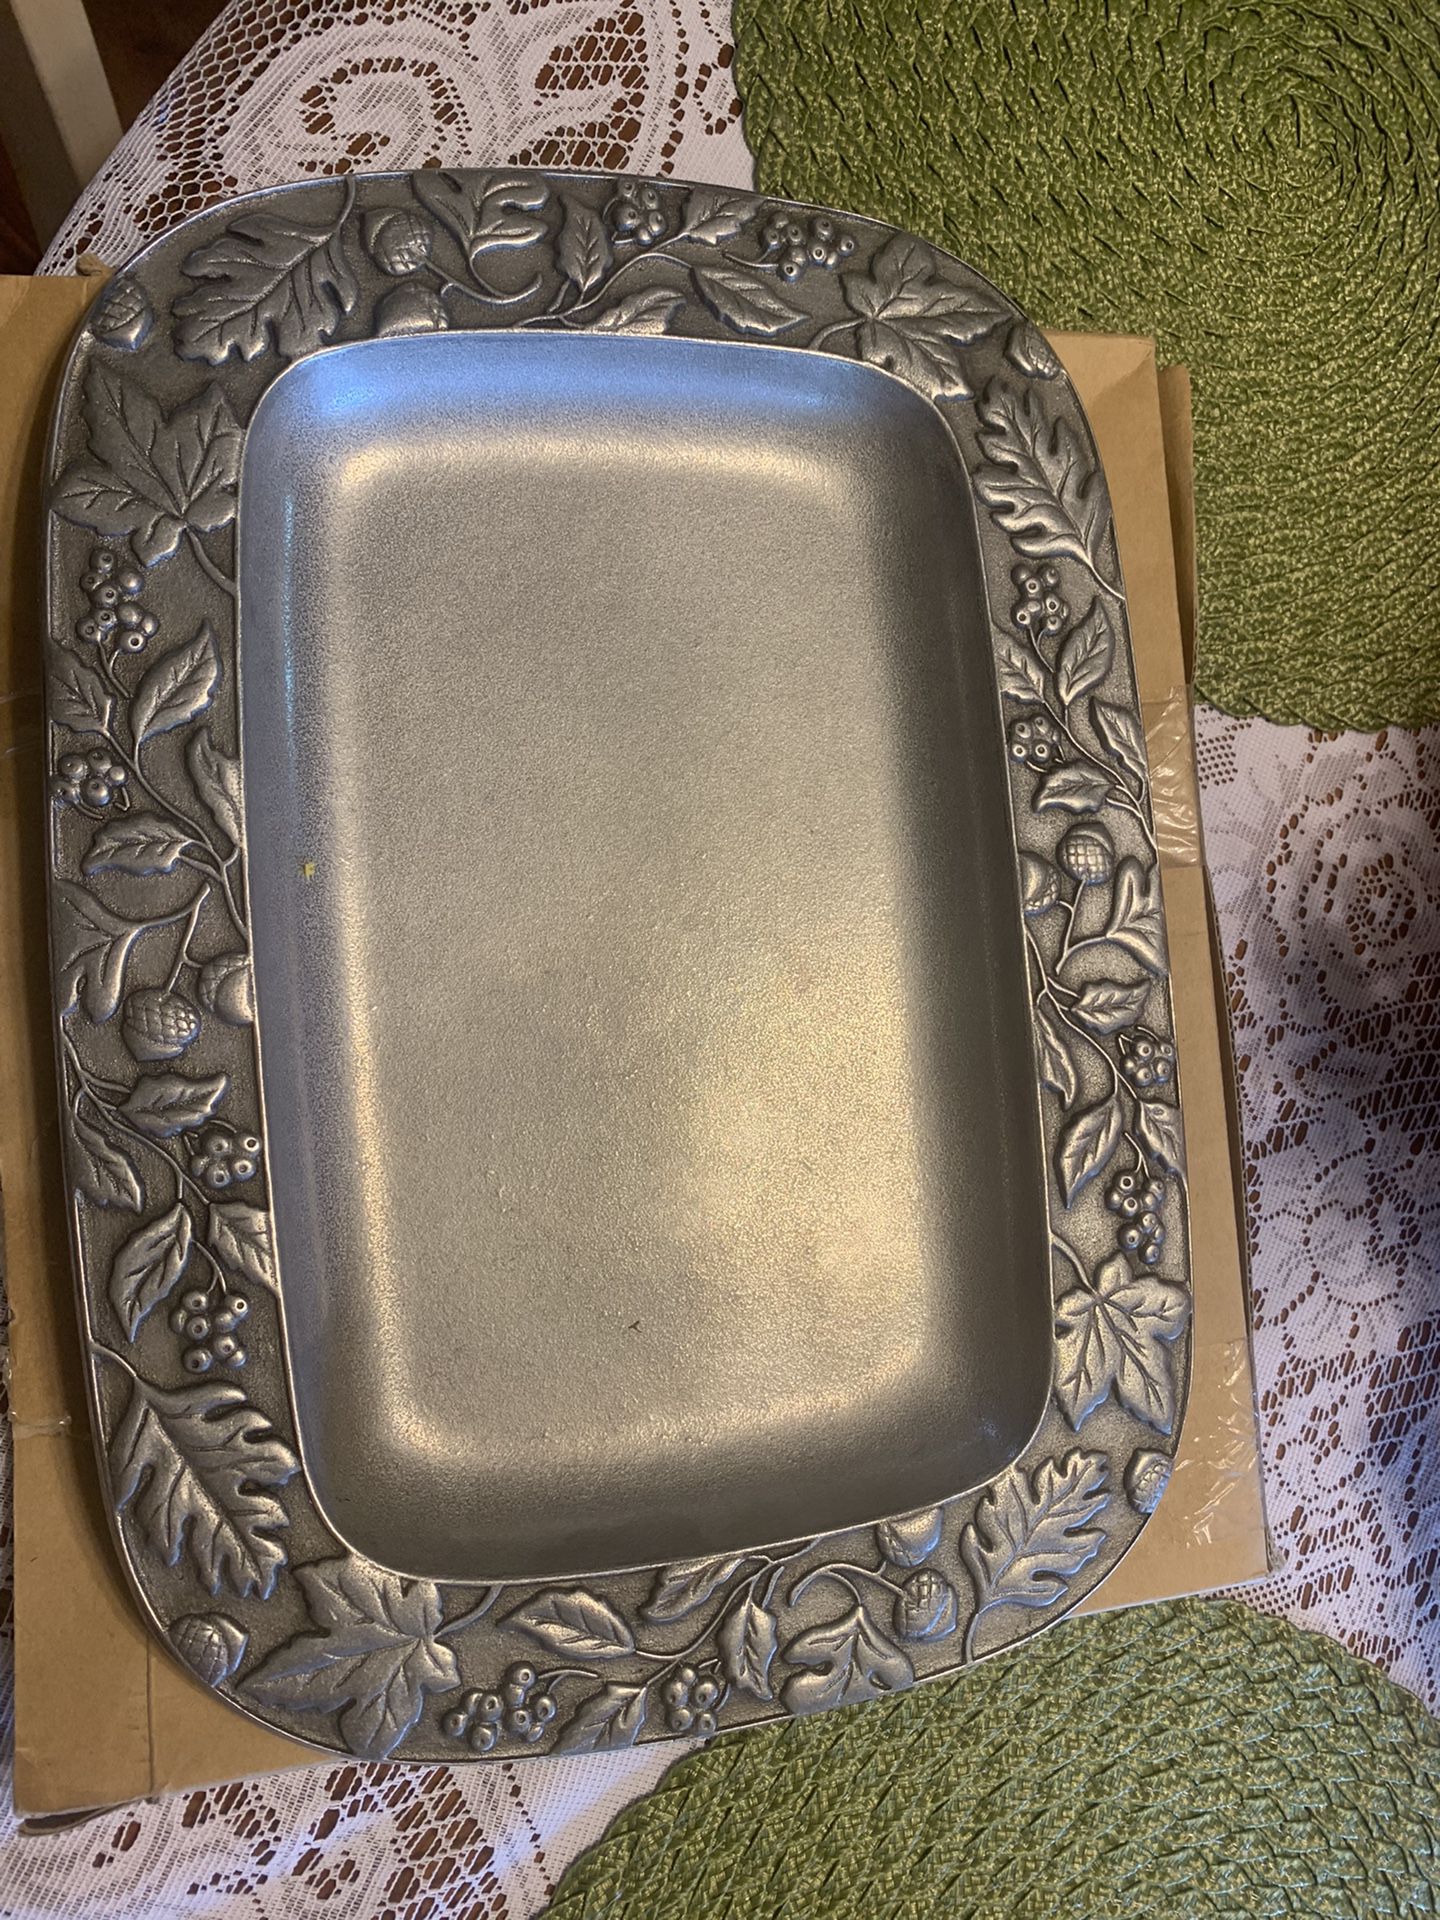 Retired Longaberger Autumn Leaves Tray -10” X 14” - 64th St & Bell In NE Phx